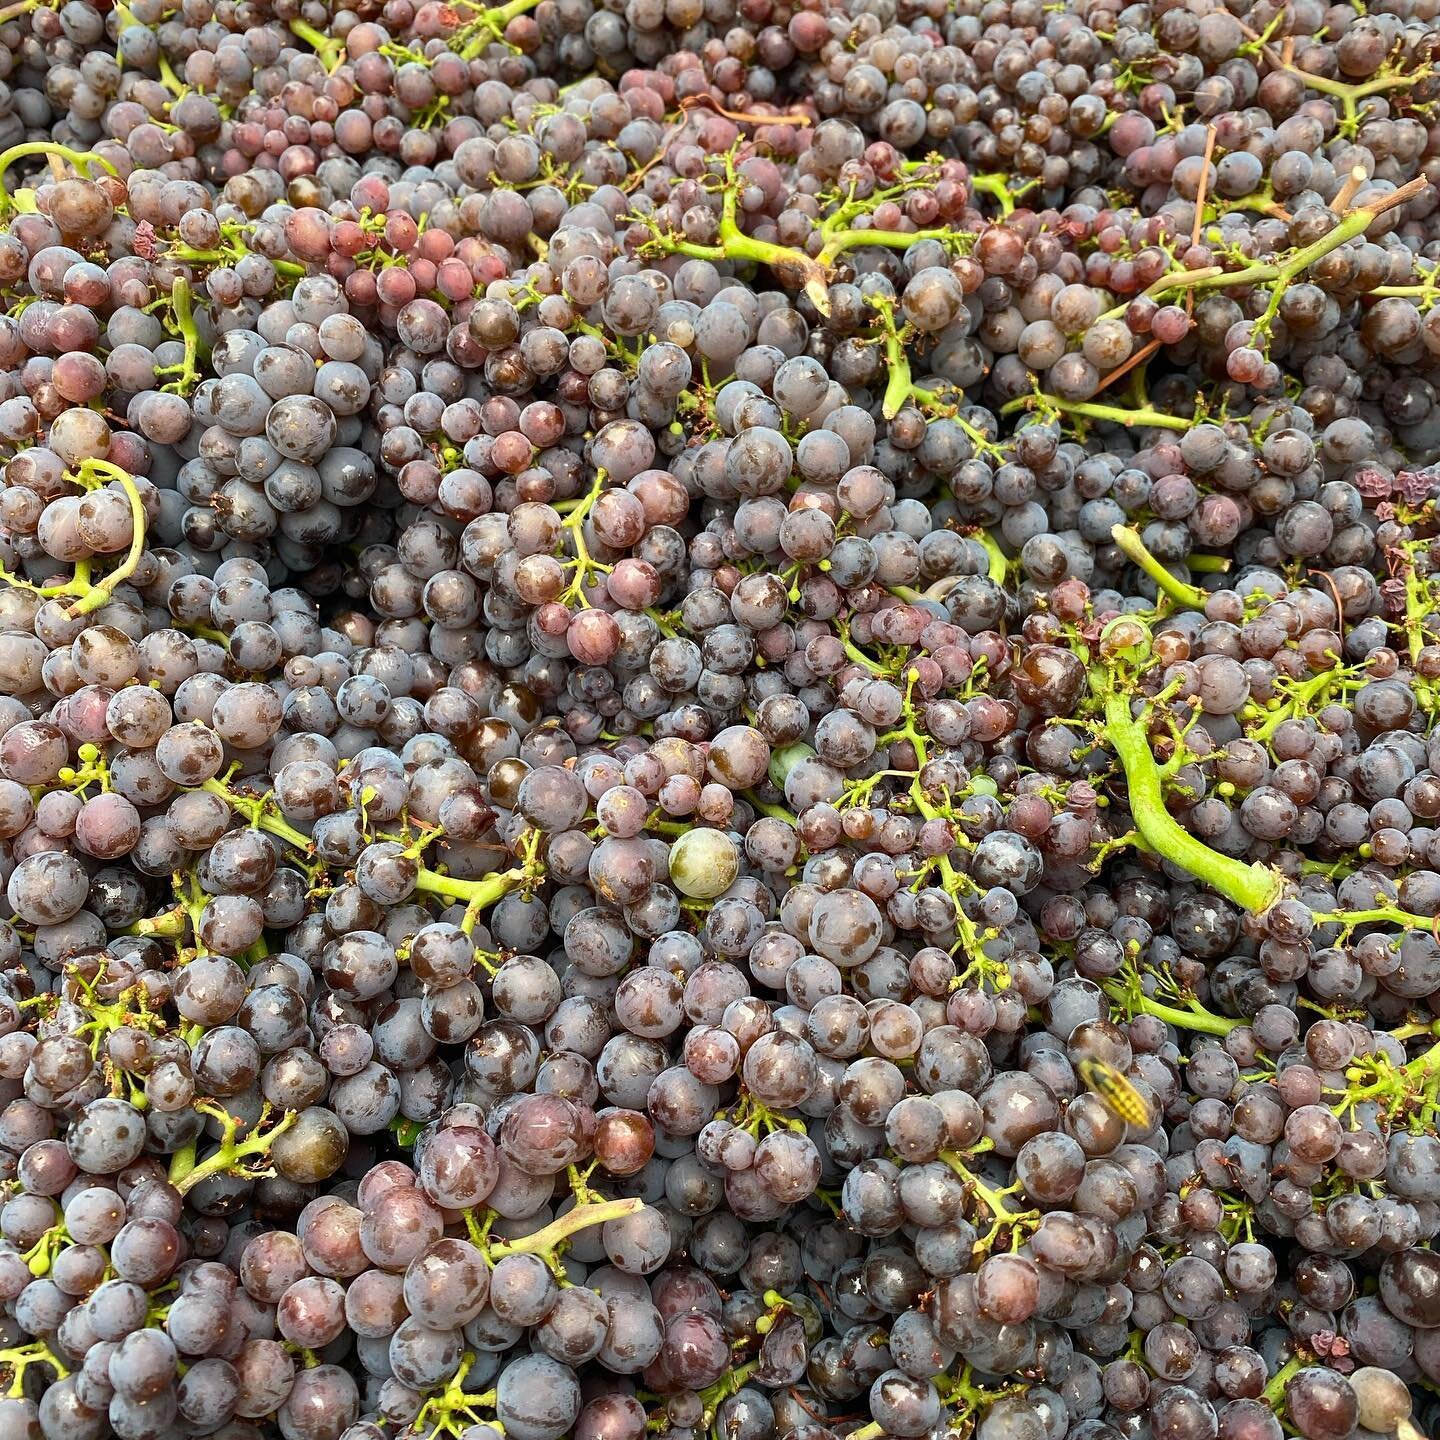 2020 &ldquo;Wicked Liquid&rdquo; is on deck. North Valley Pinot Gris from @coveyridgefarm will make up the bulk of this sparkling wine. The rest is still undetermined but will be chosen to make next Summer&rsquo;s smashable bubbly. #willamettevalley 